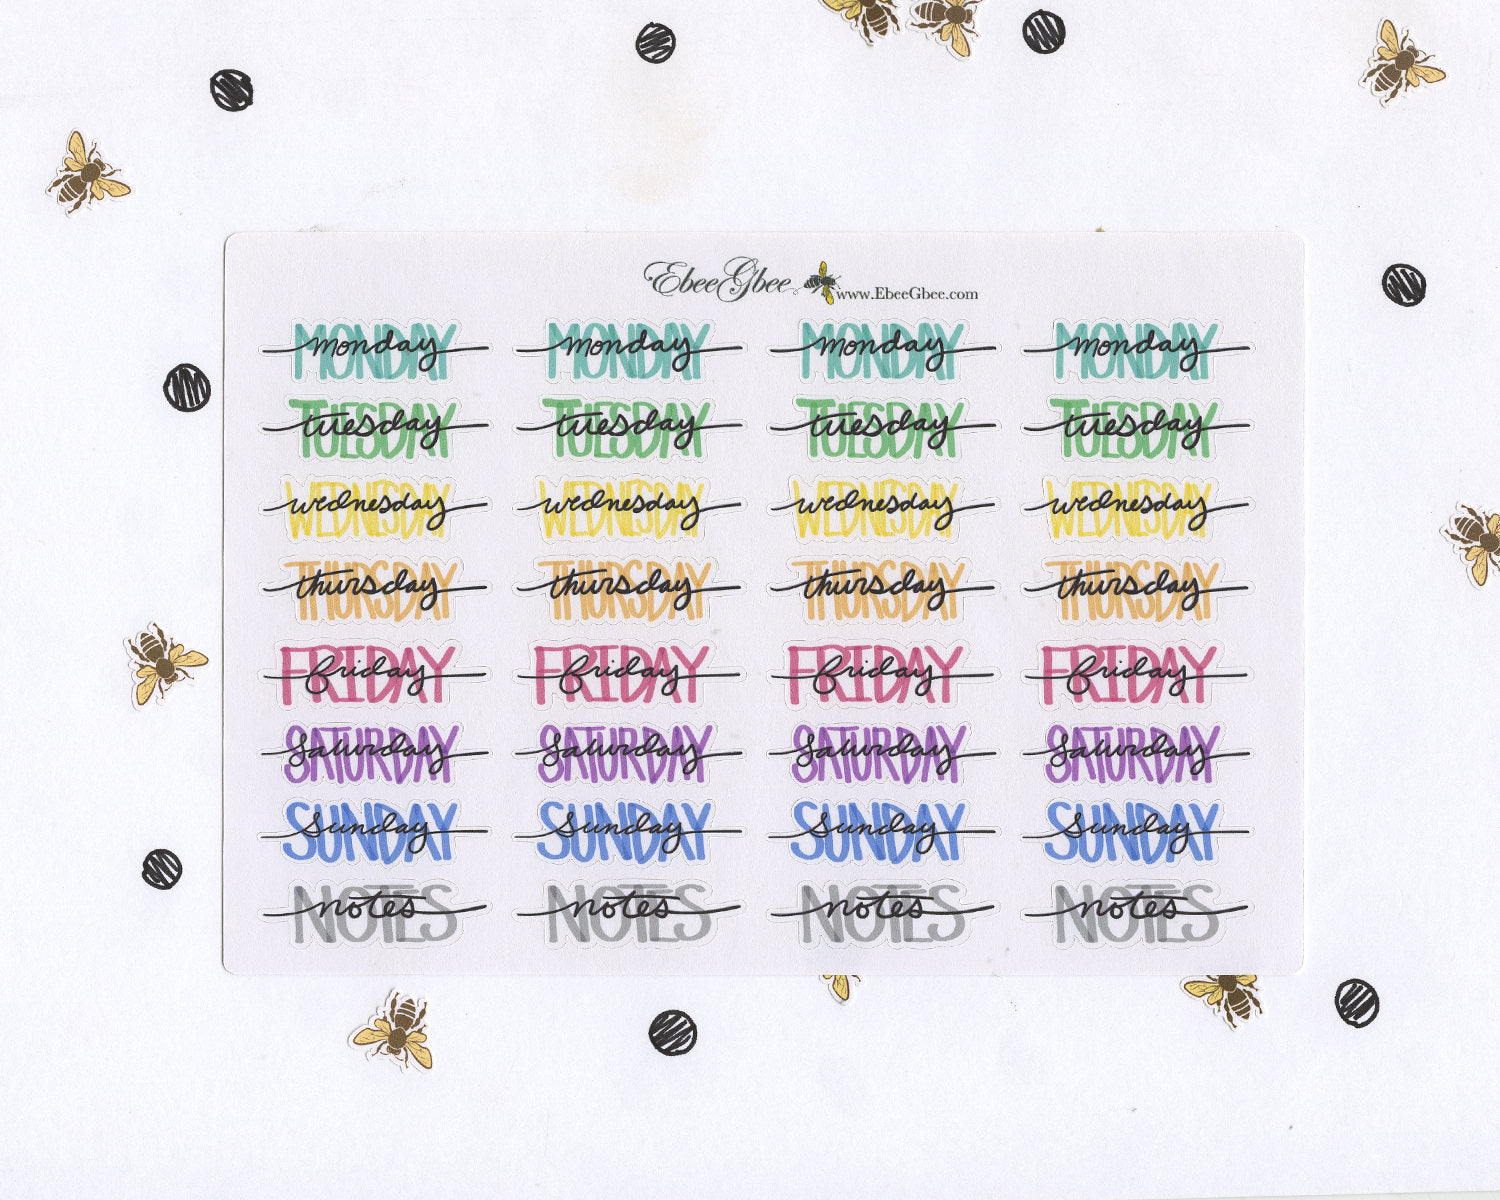 COLORFUL WEEKDAY HEADERS Planner Stickers | Hand Drawn BuJo Style